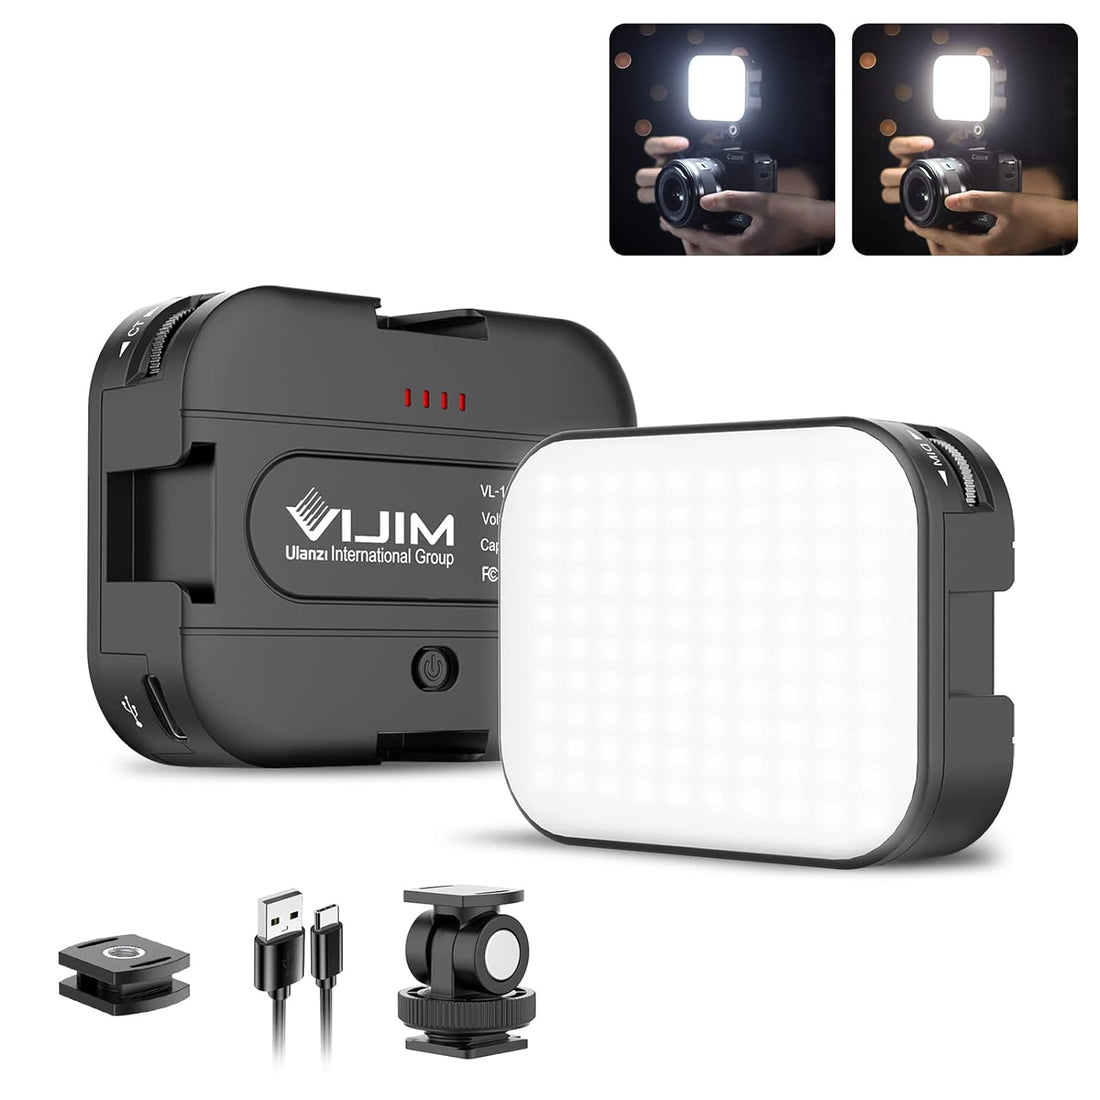 VIJIM VL100C Bi-Color LED Video Light on Camera with Adjustable Stand, Mini Rechargeable 2000mAh LED Camera Lights,CRI95+ Dimmable 2500-6500K Ultra Bright Photo and Video Lighting,LED Fill Lamp